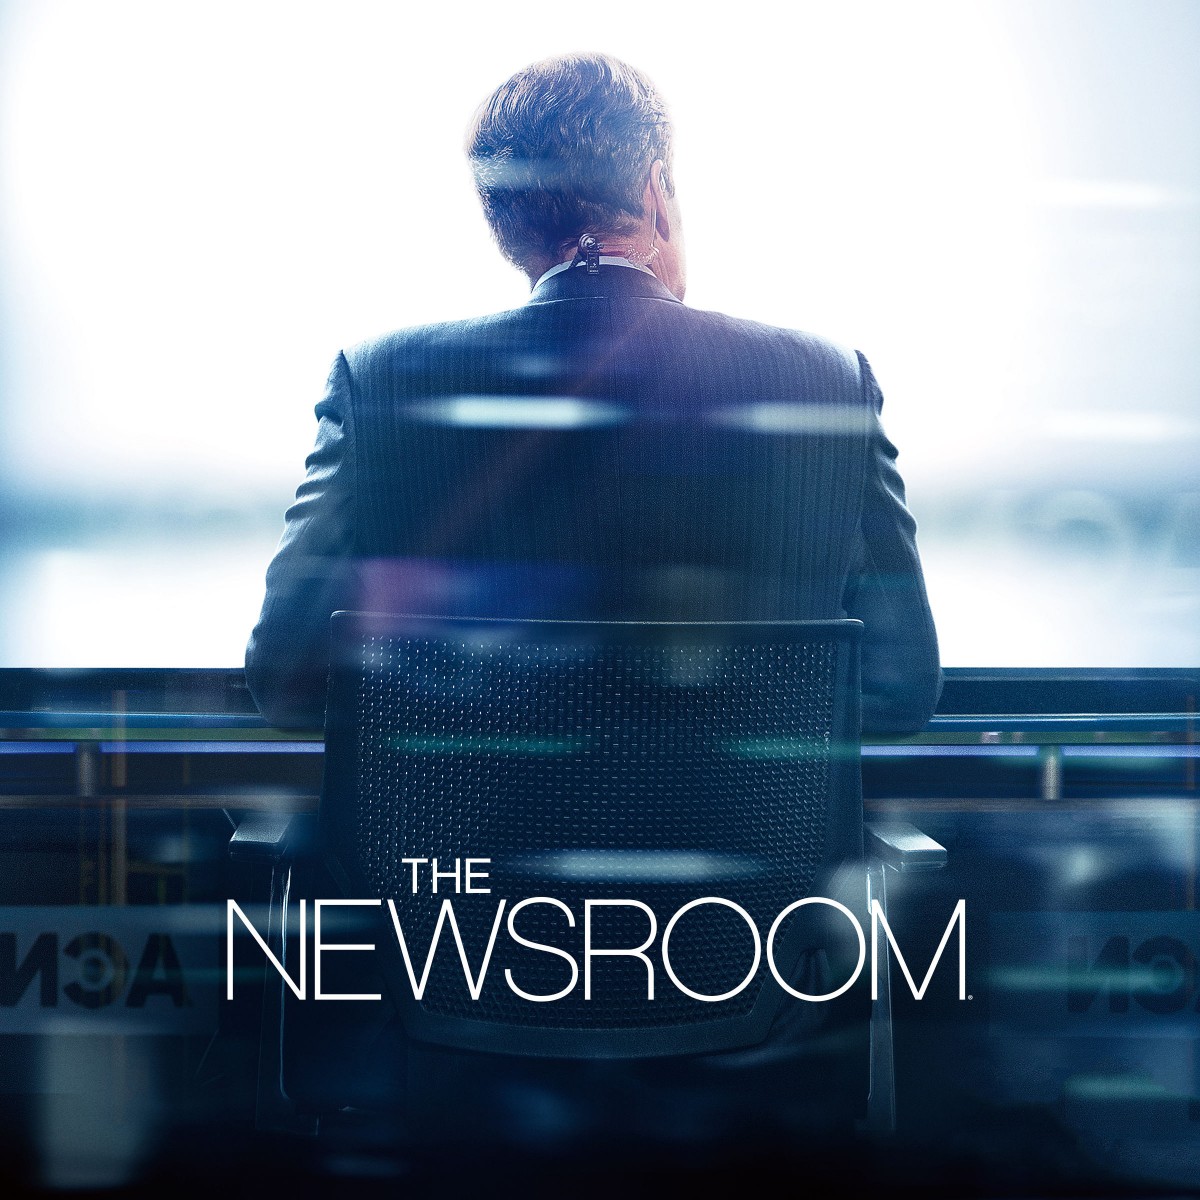 The Newsroom HBO Promos - Television Promos1200 x 1200